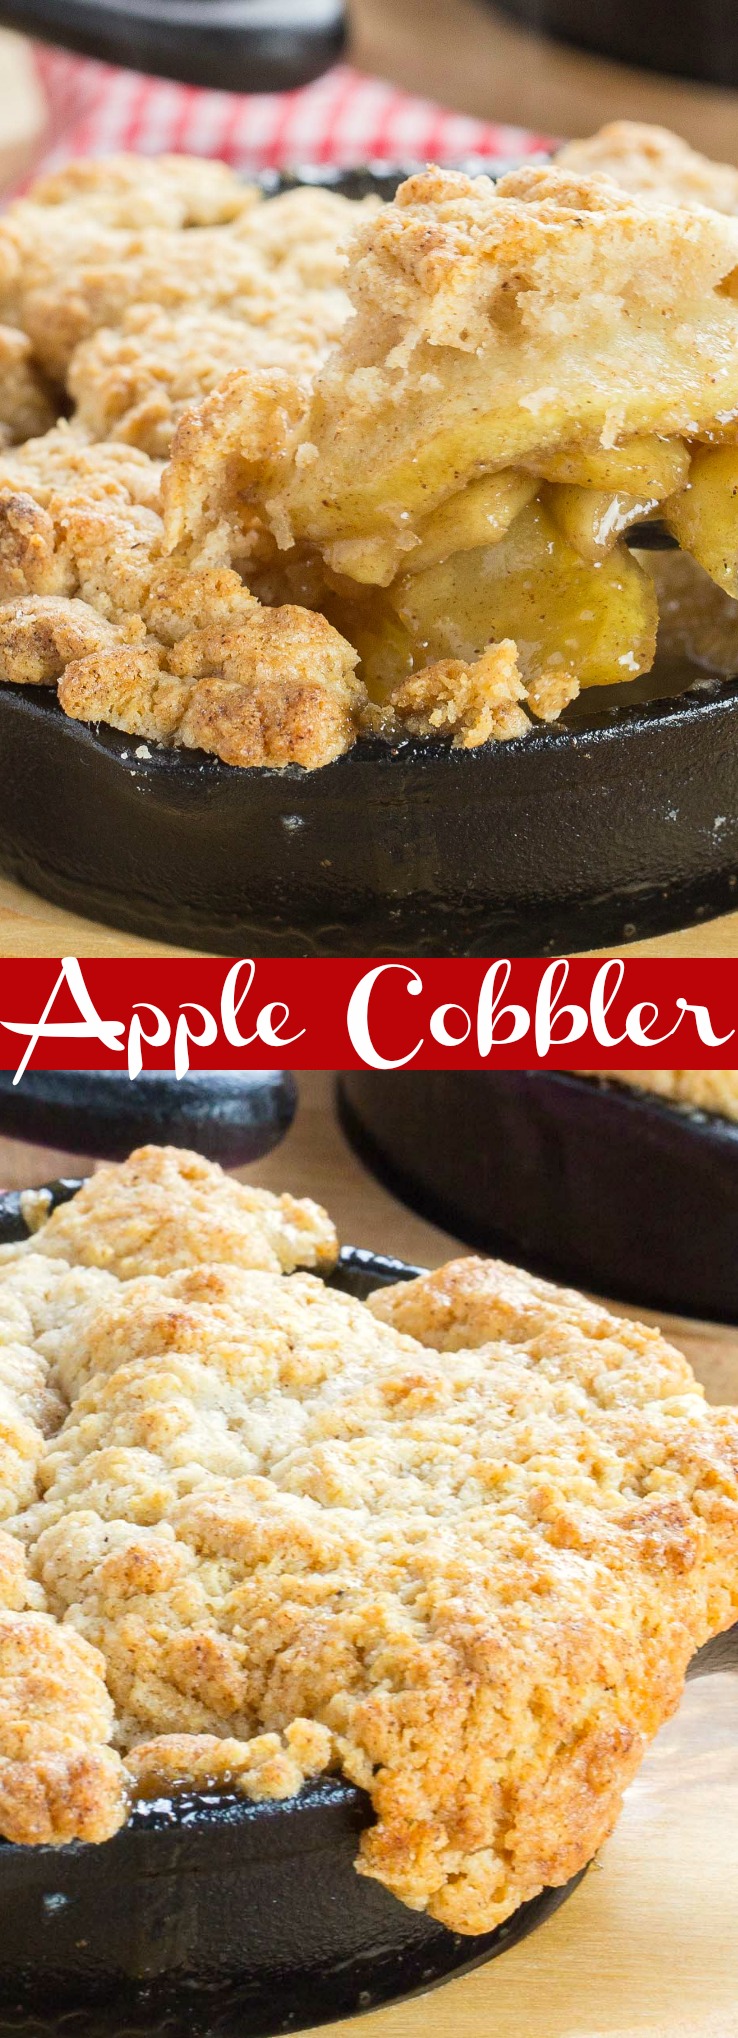 Apple Cobbler is a favorite apple dessert that is easy to make! Savory cinnamon apple filling topped with a buttery crisp crust. via @artandthekitch